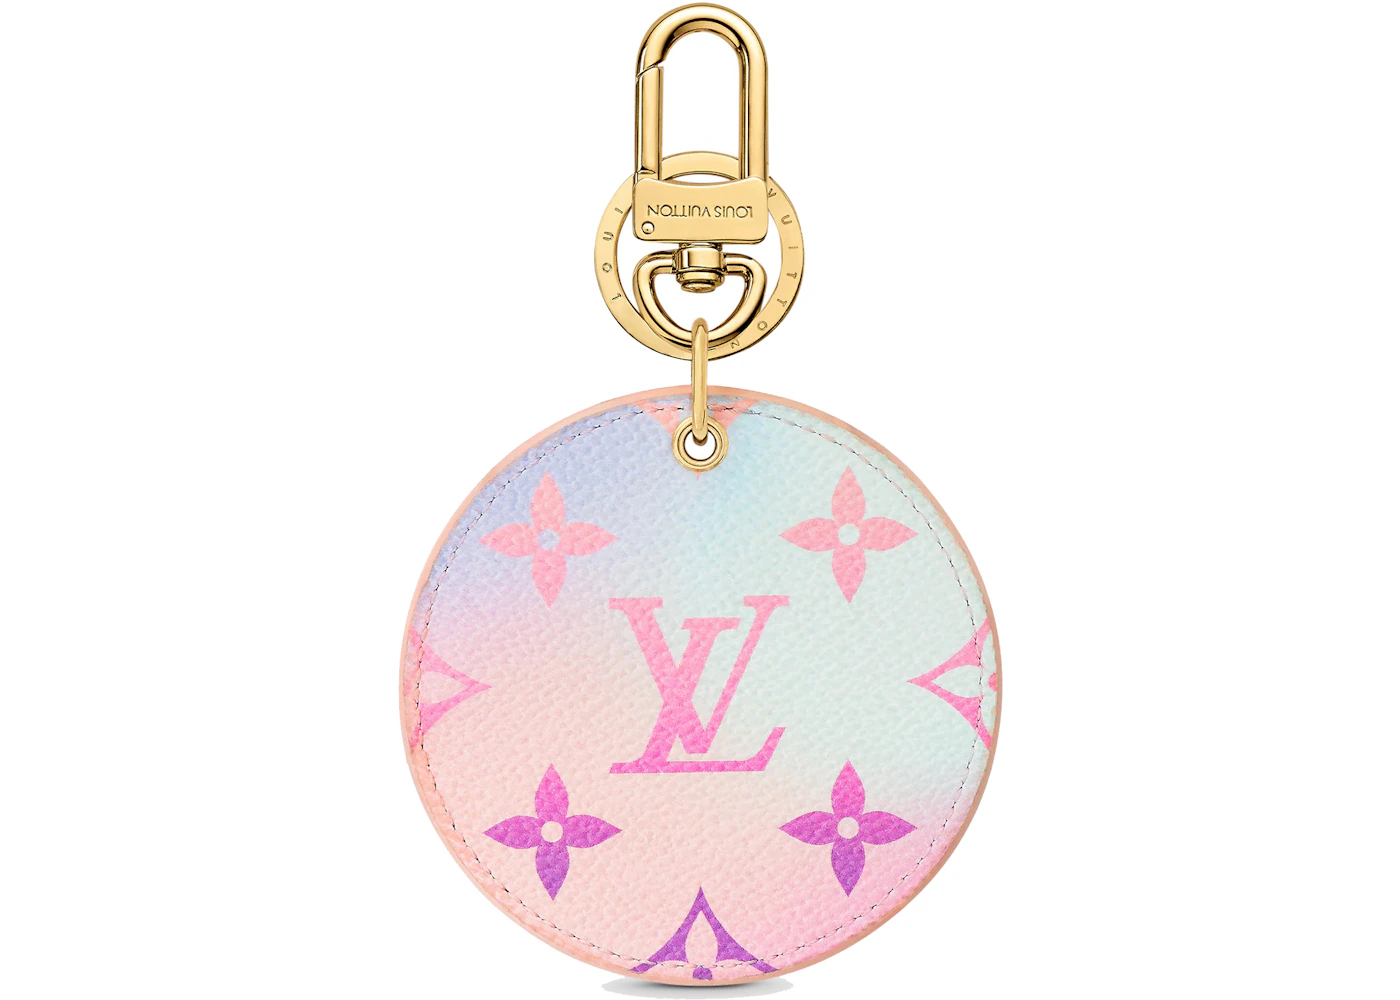 Louis Vuitton Key Holder and Bag Charm LV Escale Blue in Coated